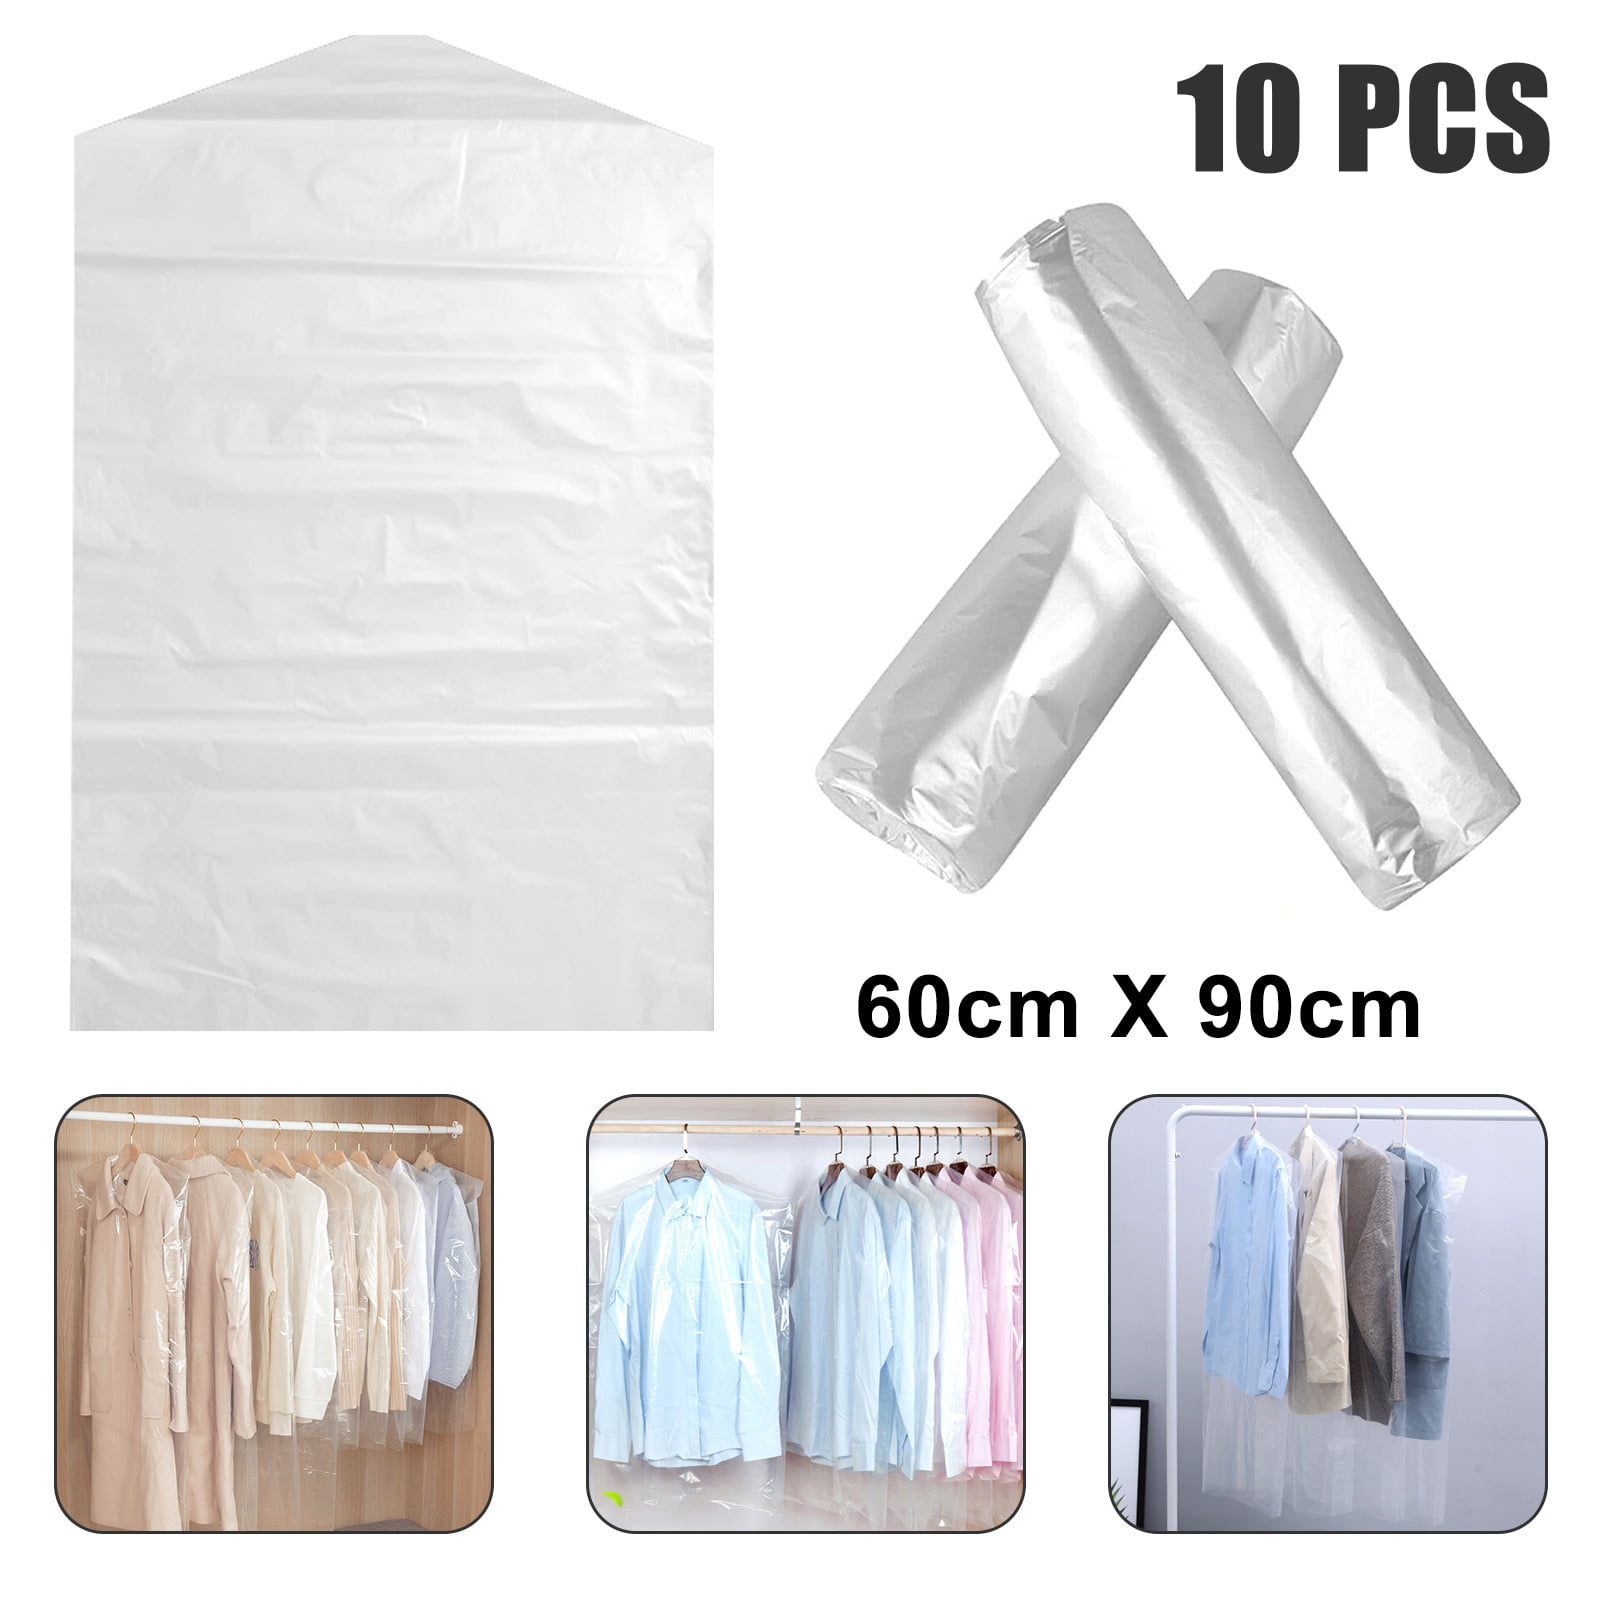 Hoesh White Breathable 38" Shirt Dress Cover Laundry Dry Cleaner Garment Bags 